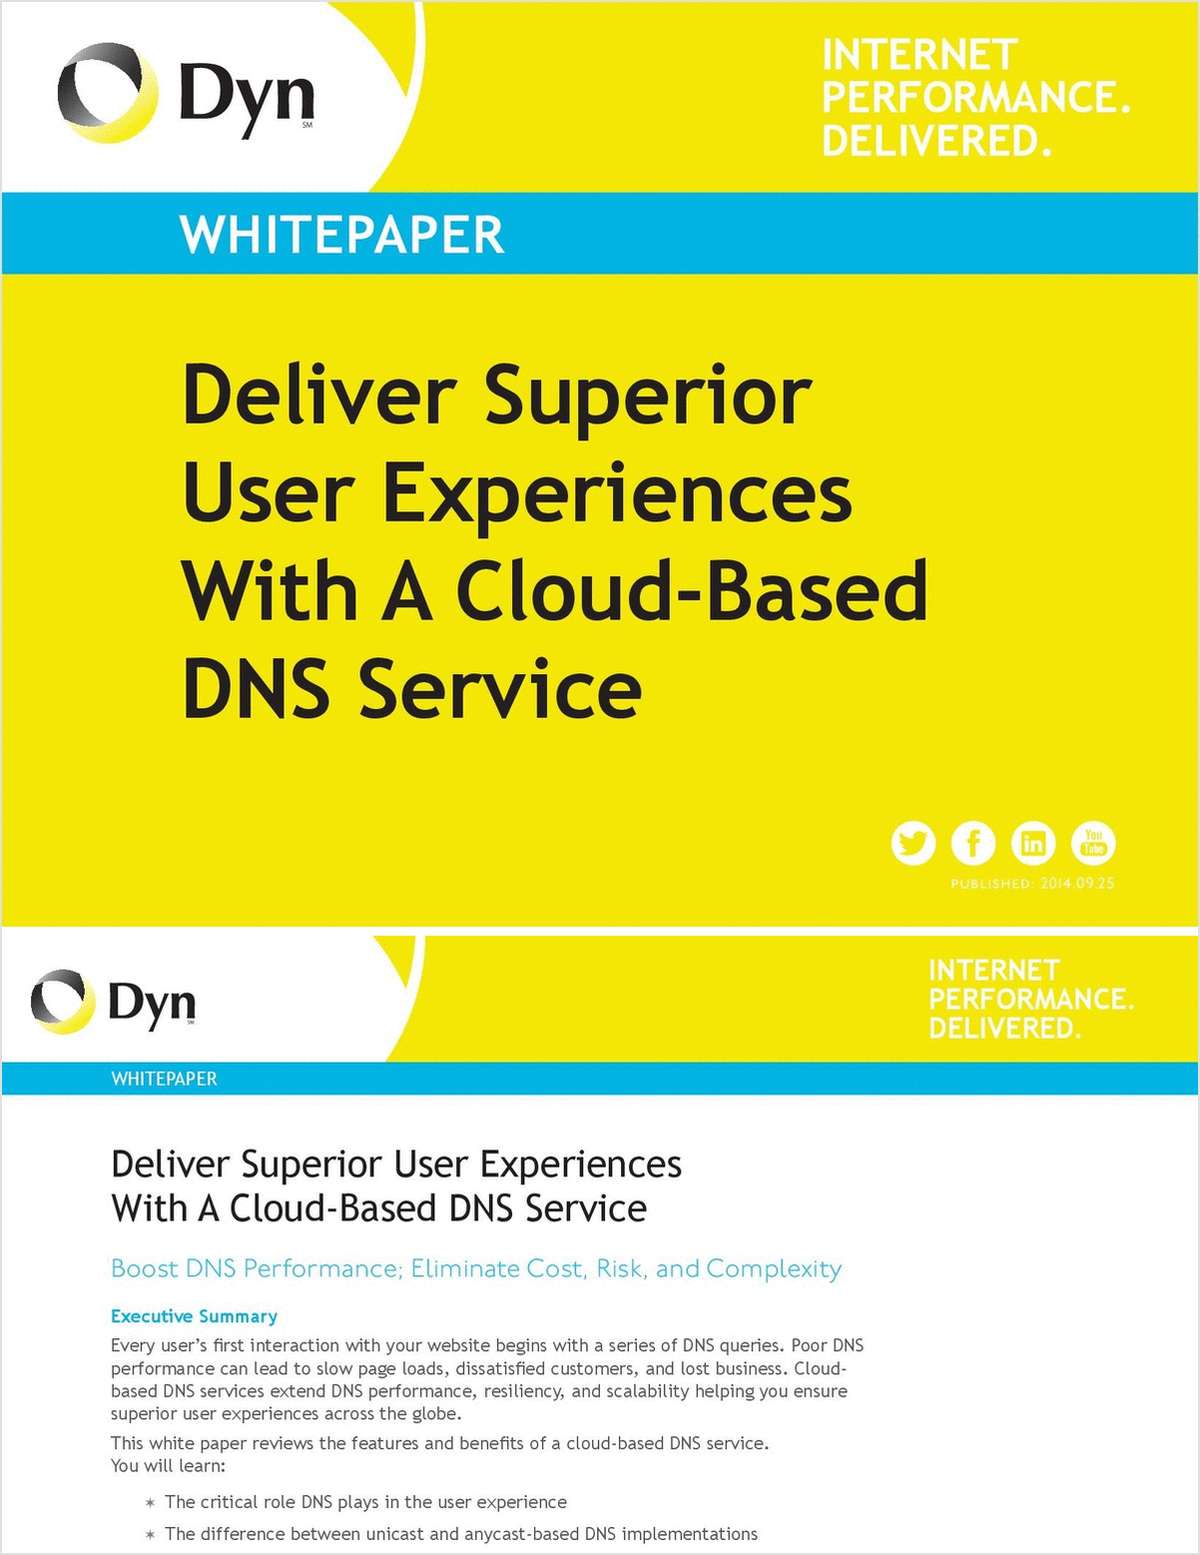 Deliver Superior User Experiences With A Cloud-Based DNS Service